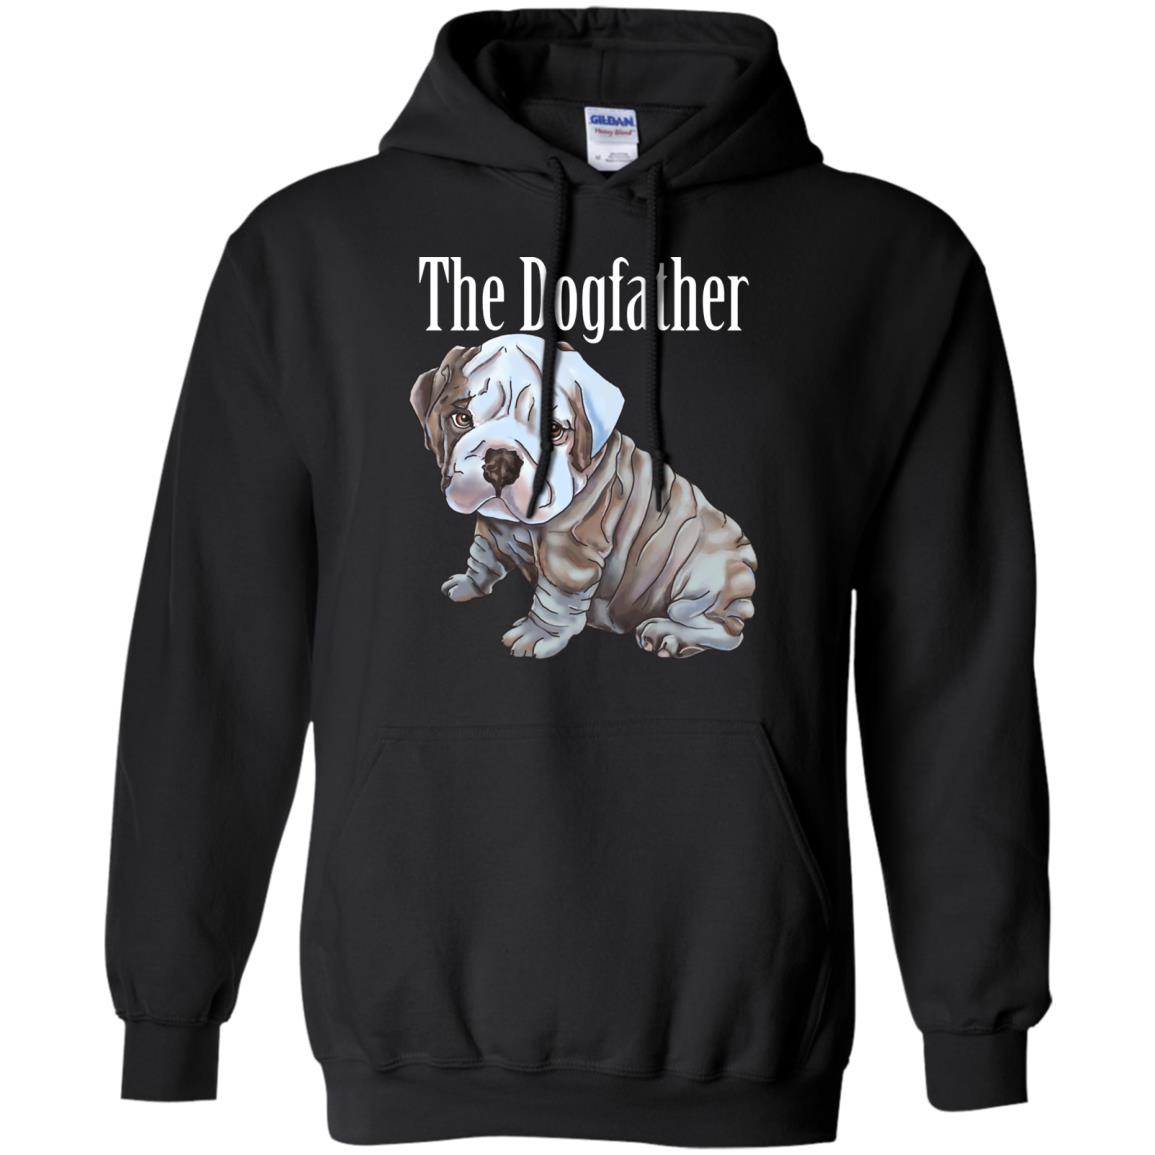 English bulldog Hoodie For Men - The Dogfather - GoneBold.gift